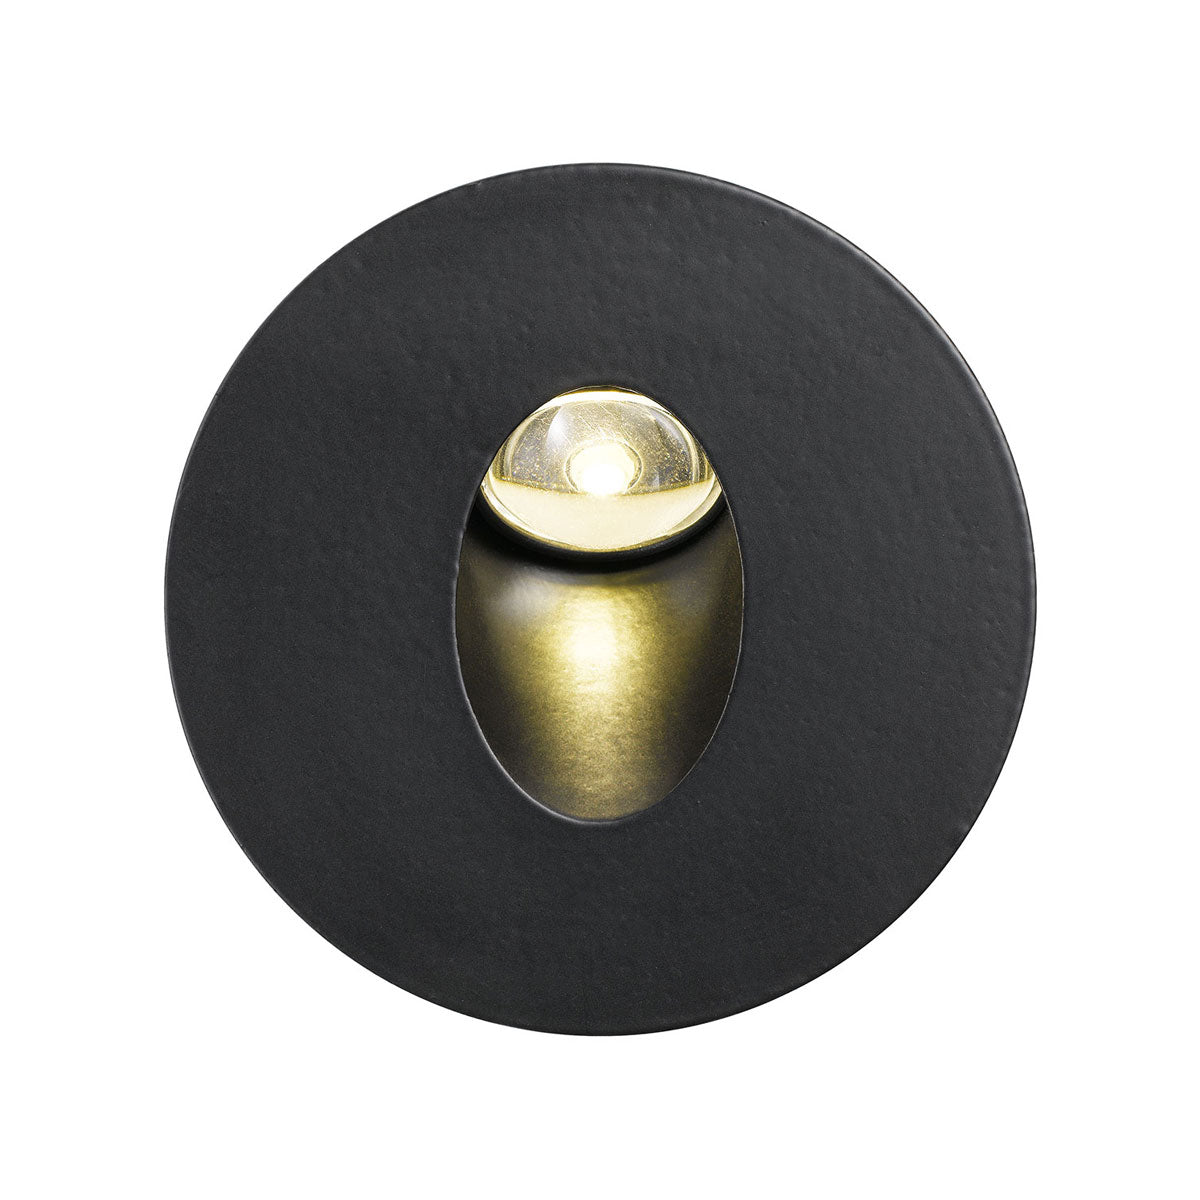 Snap Round Black Fascia LED Recessed Stair Wall Light